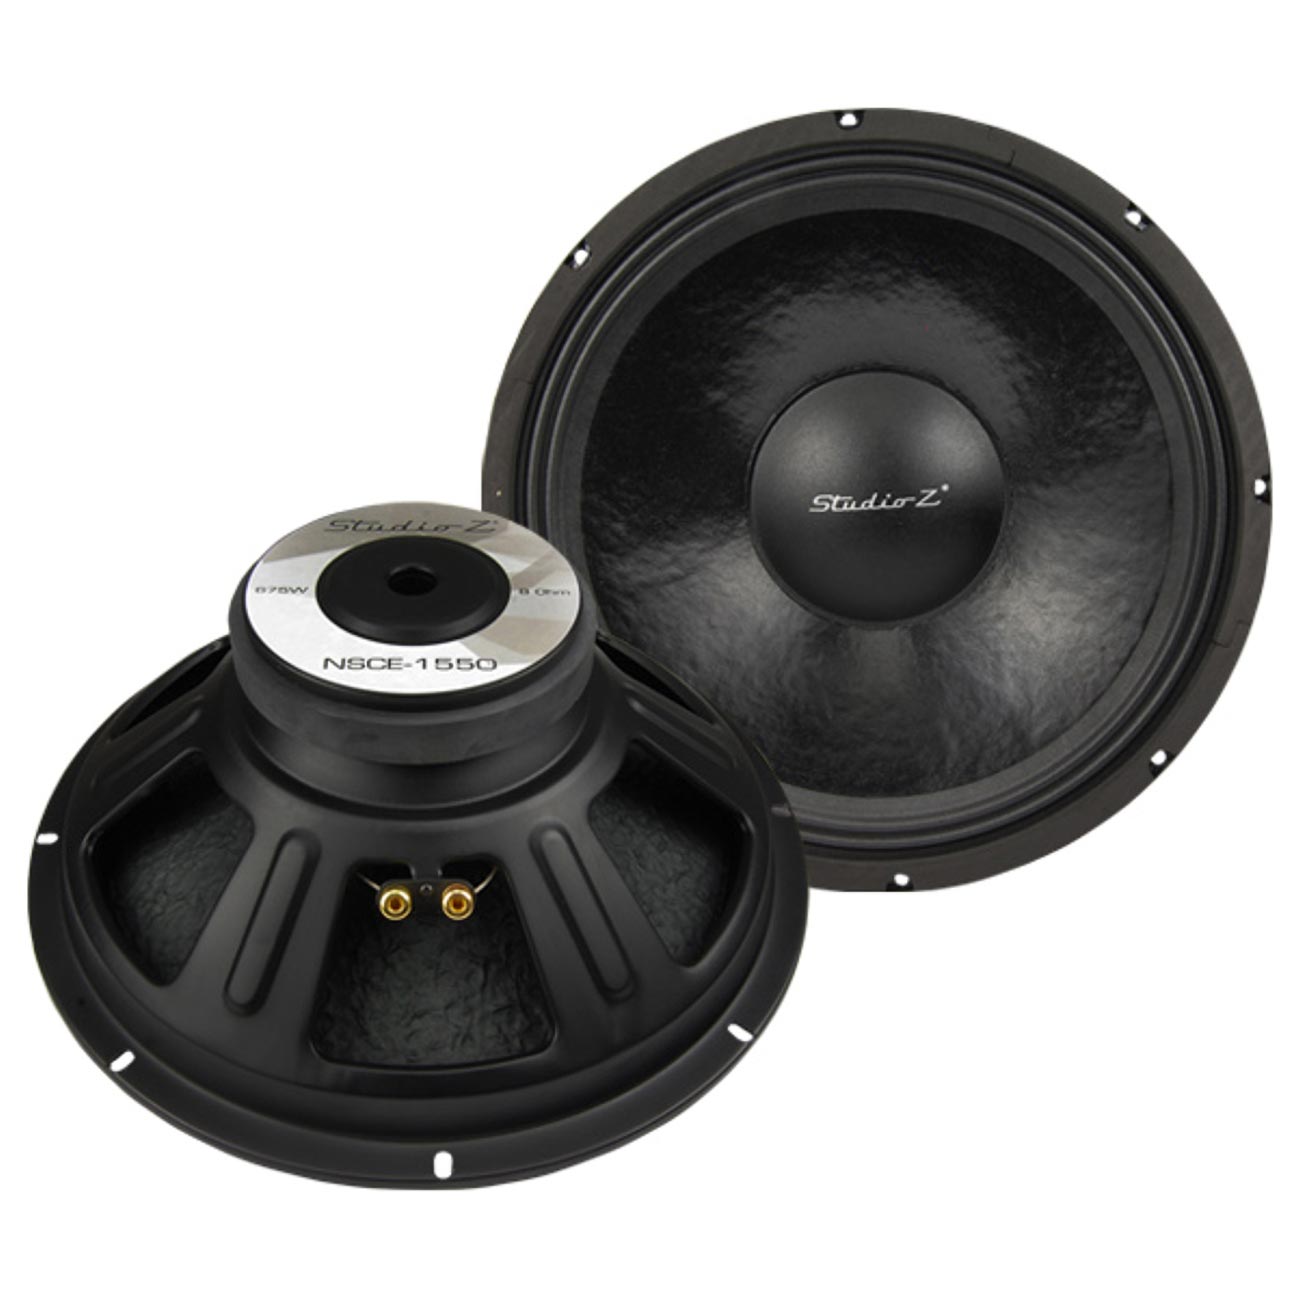 Studio Z 15" Woofer 675 watts Max 8 OHM with 2" Aluminum Voice Coil